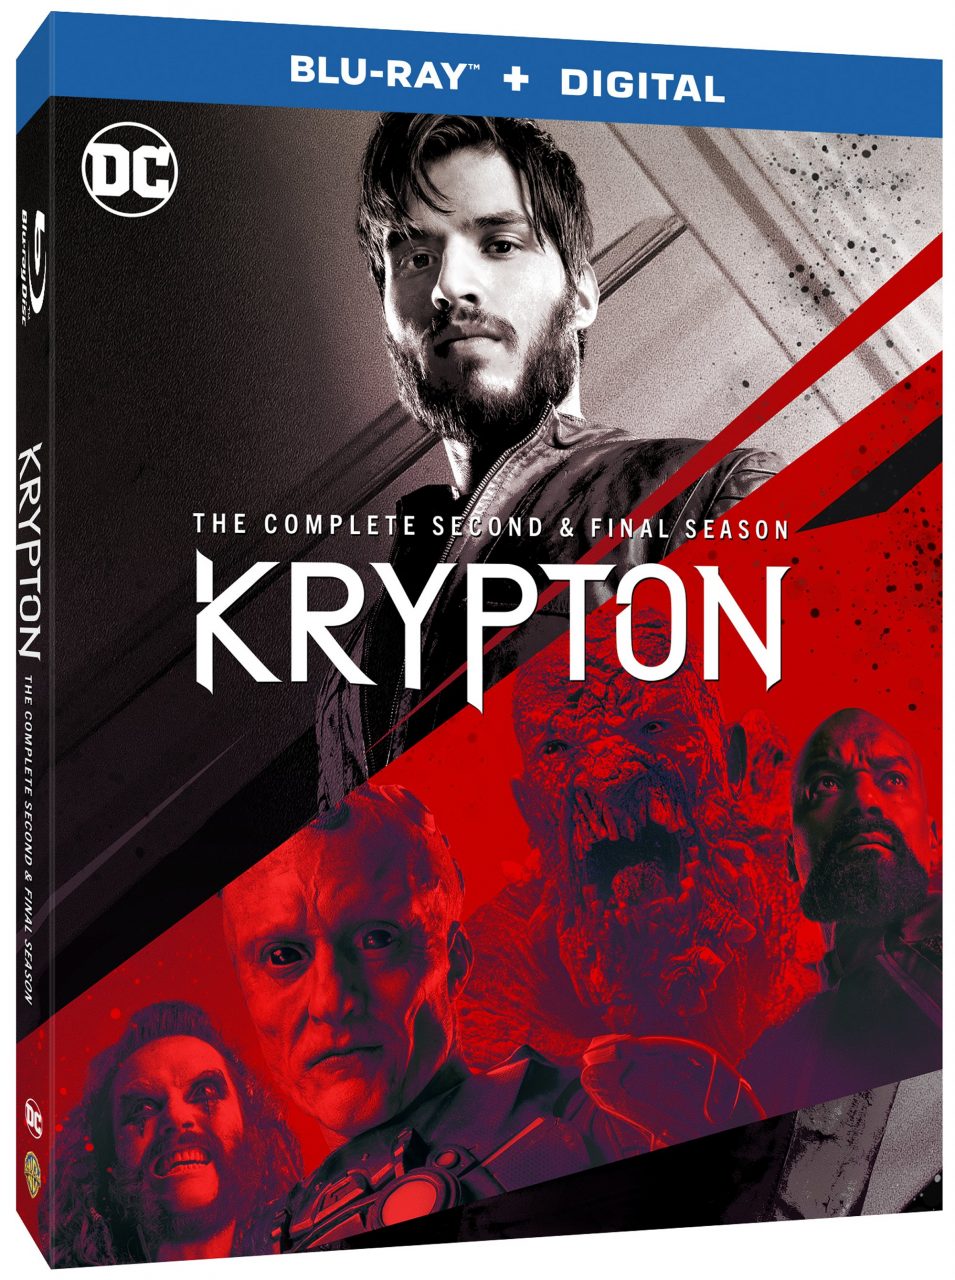 Krypton: The Complete Second And Final Season Blu-Ray Combo Pack cover (Warner Bros Home Entertainment)